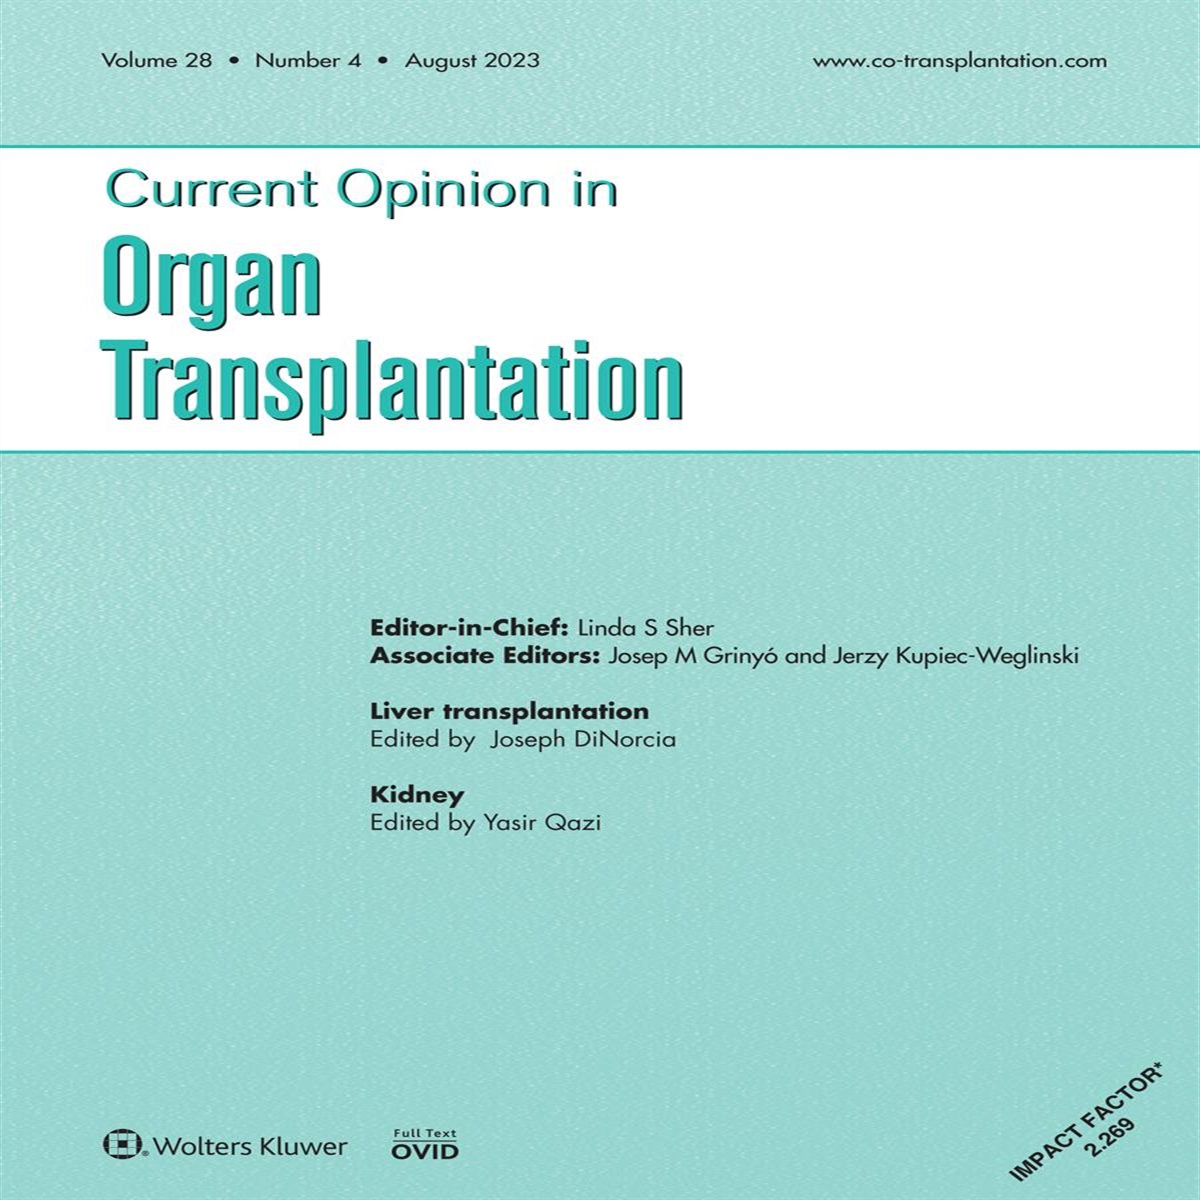 Mind the gaps: reframing patient selection and organ allocation in liver transplantation